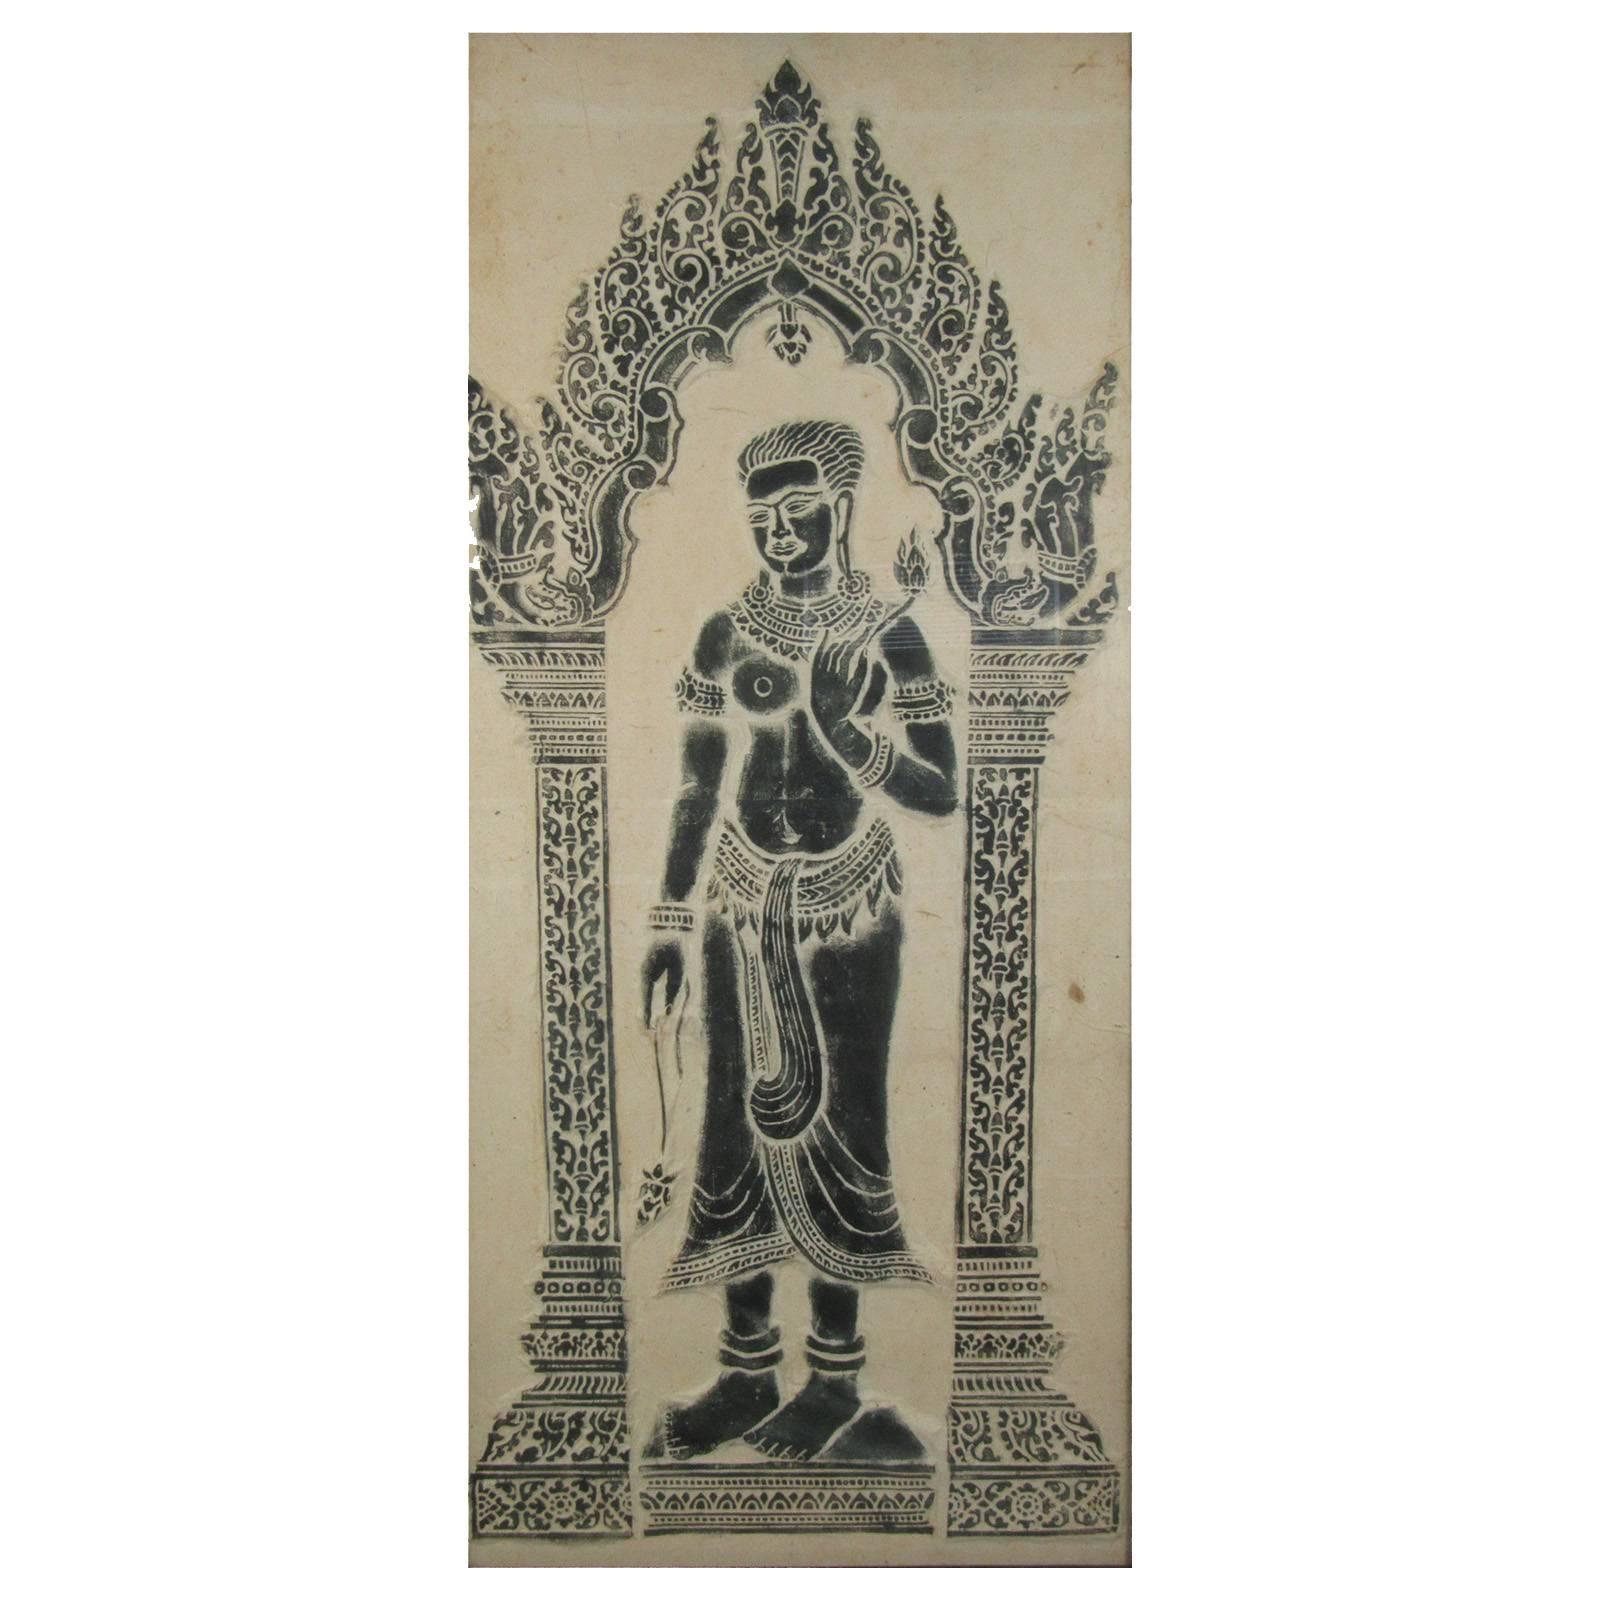 Thai temple rubbing on handmade paper of woman standing in archway. Bears 